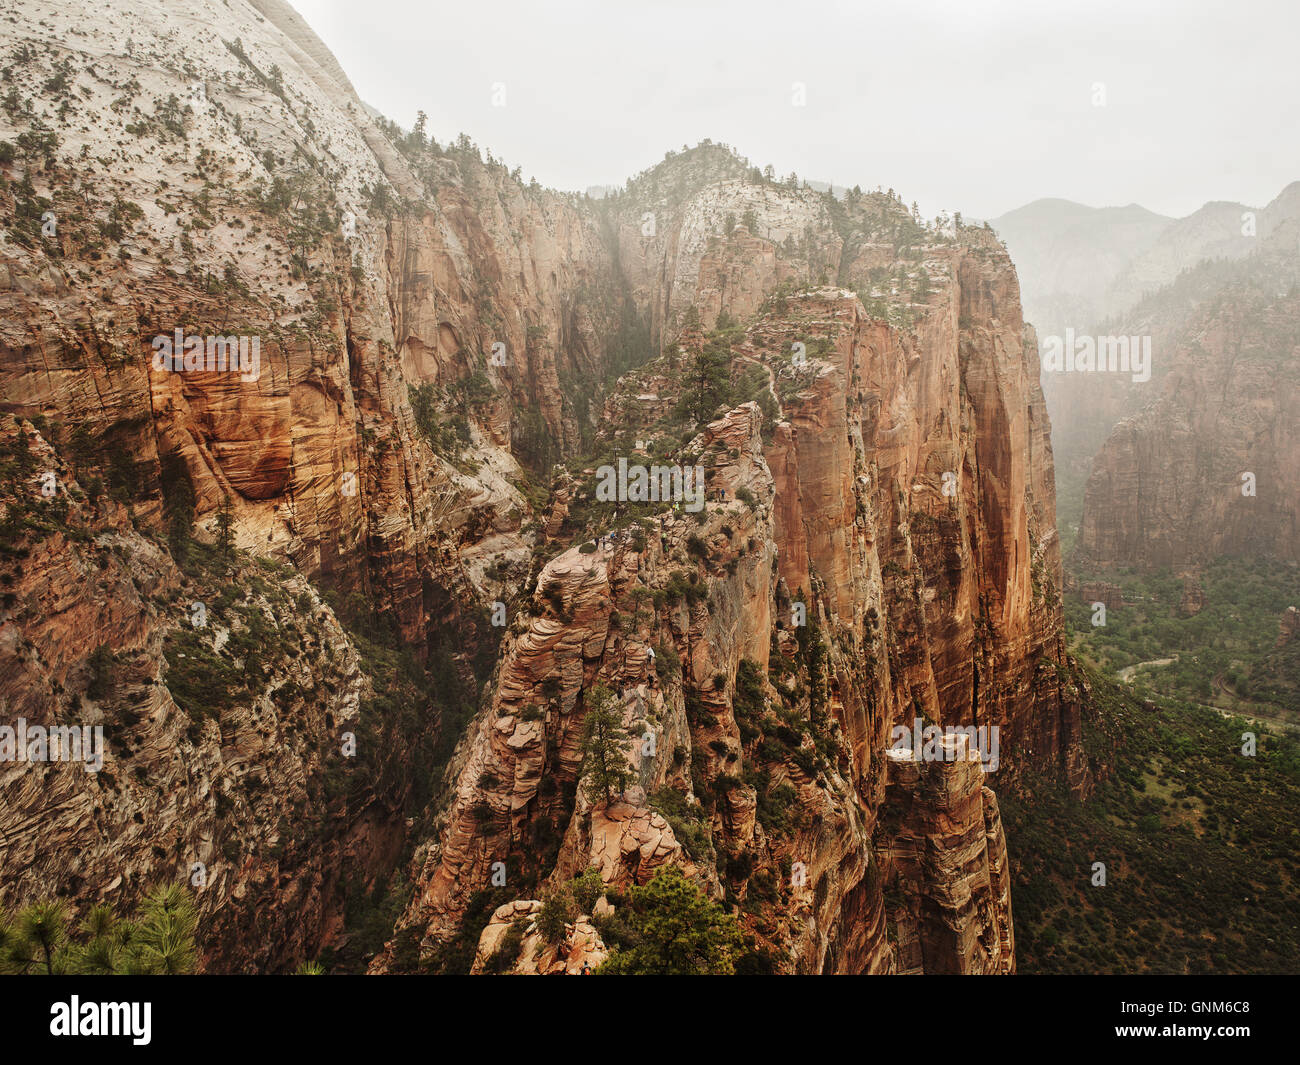 A view in Utah's Zion National Park Stock Photo